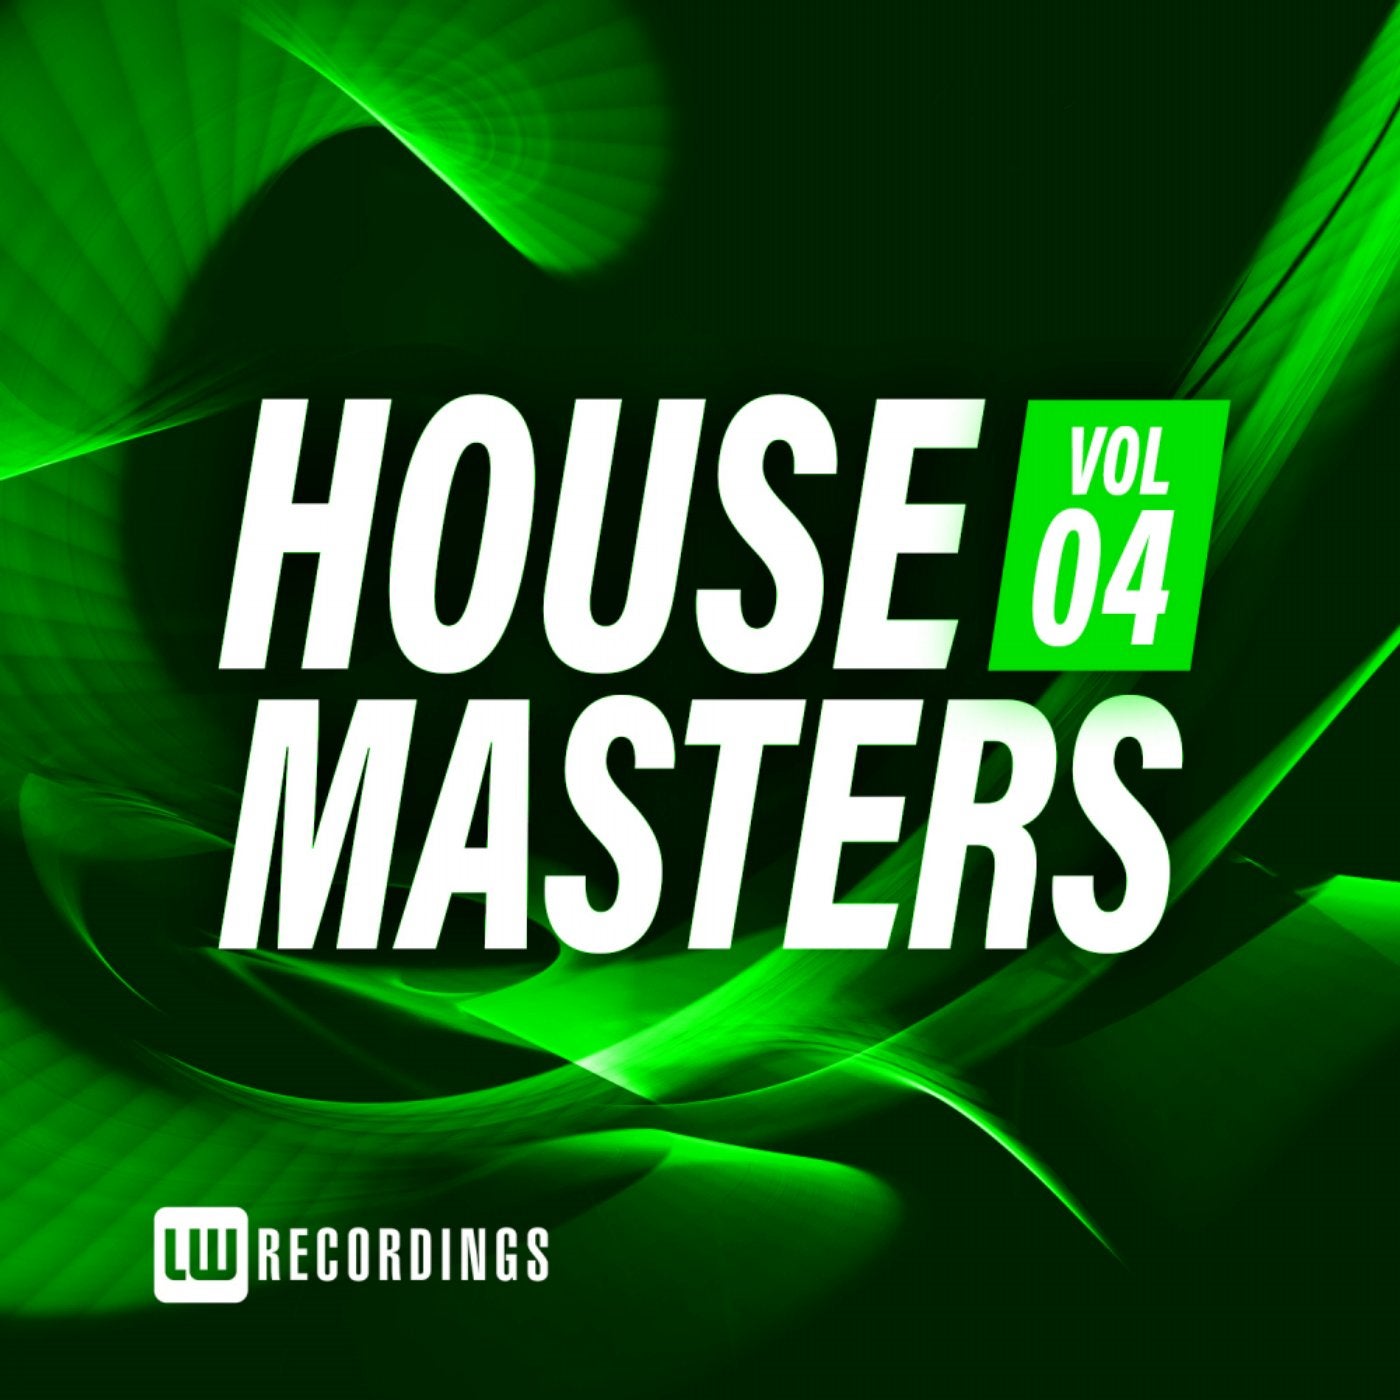 House Masters, Vol. 04